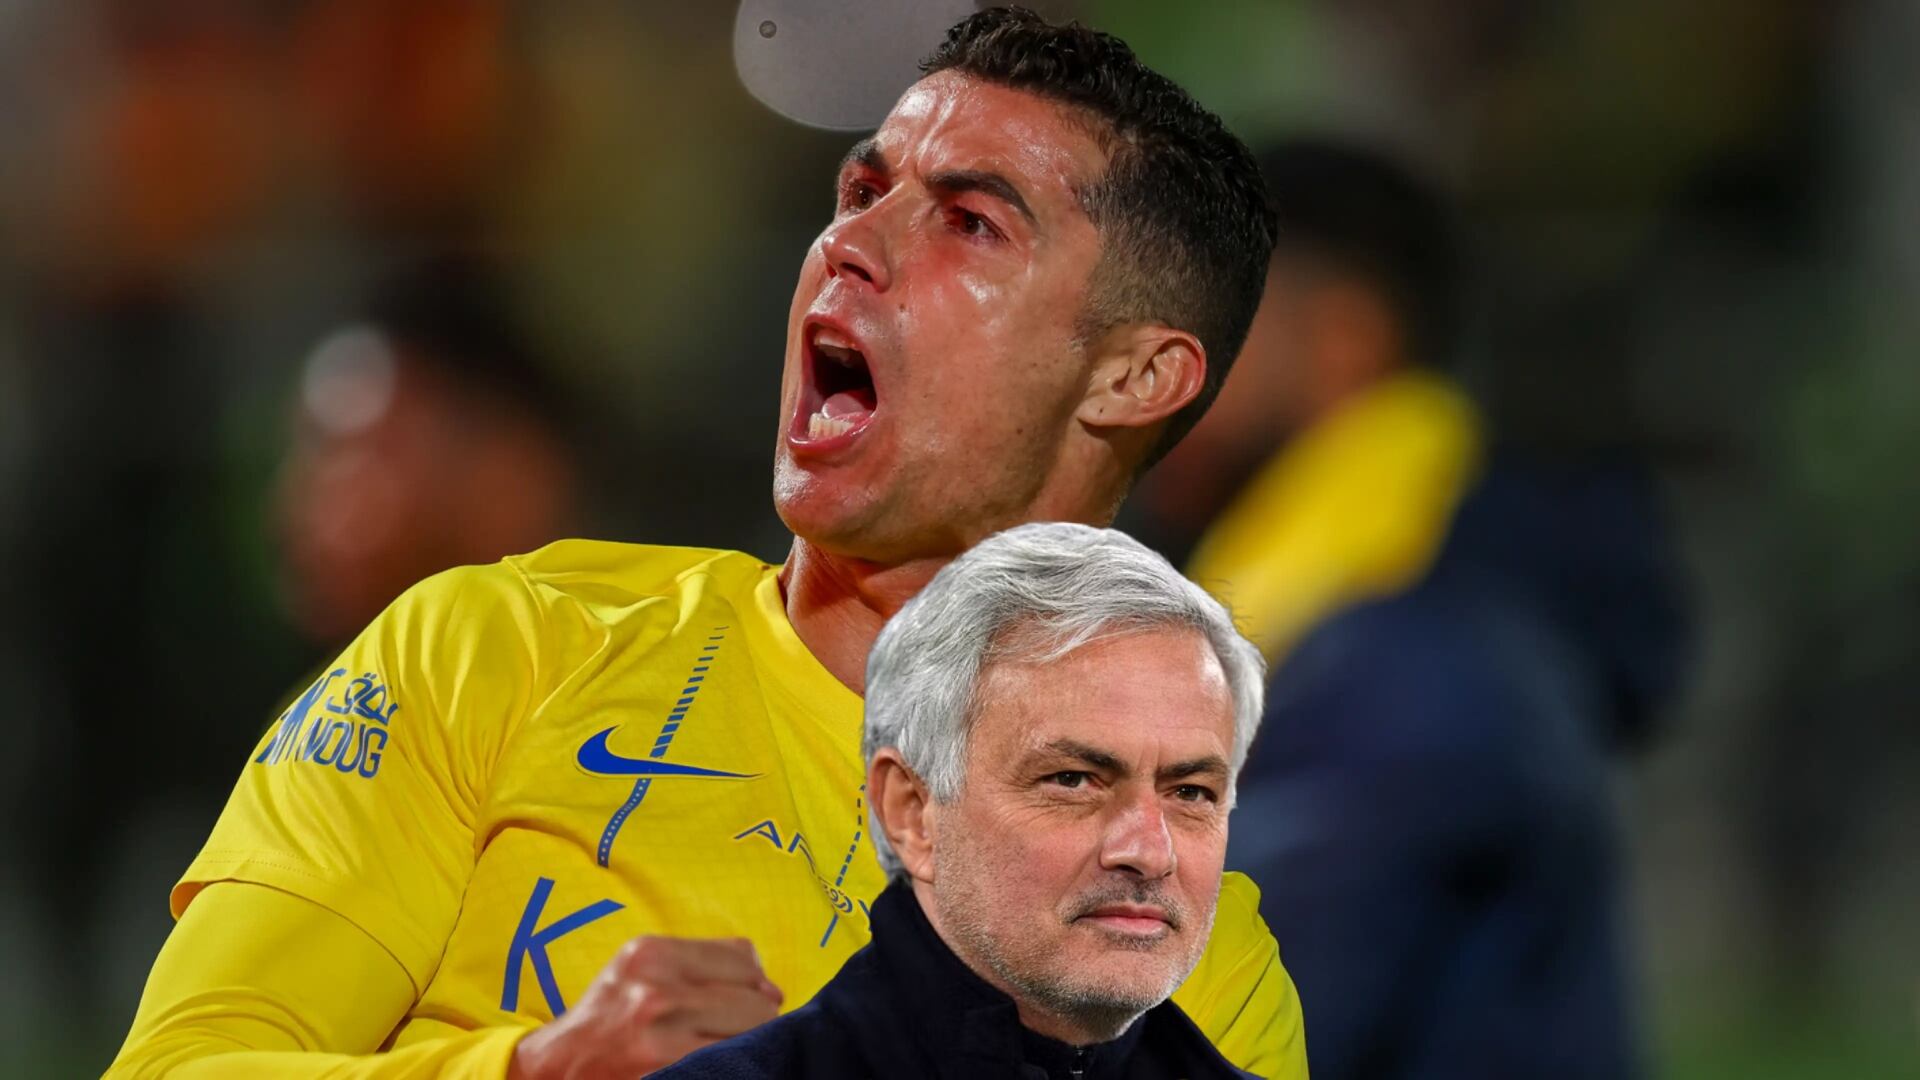 Cristiano could be coached by Mourinho again but not at Al Nassr, the team that could bring CR7 and Mou together 